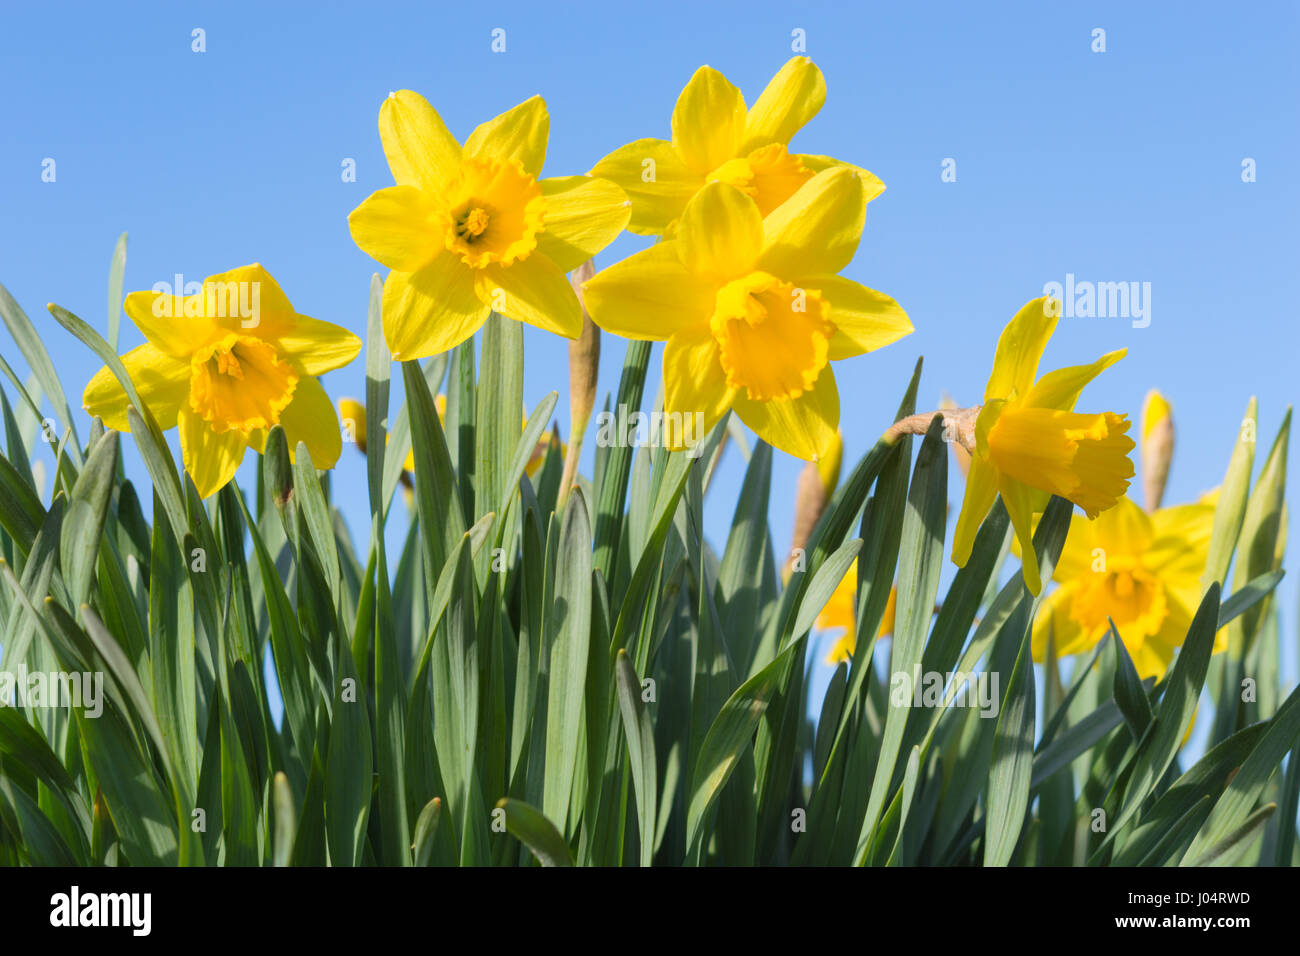 Sunny spring glade with bottom view of beautiful yellow Narcissus flowers against clear blue sky Stock Photo